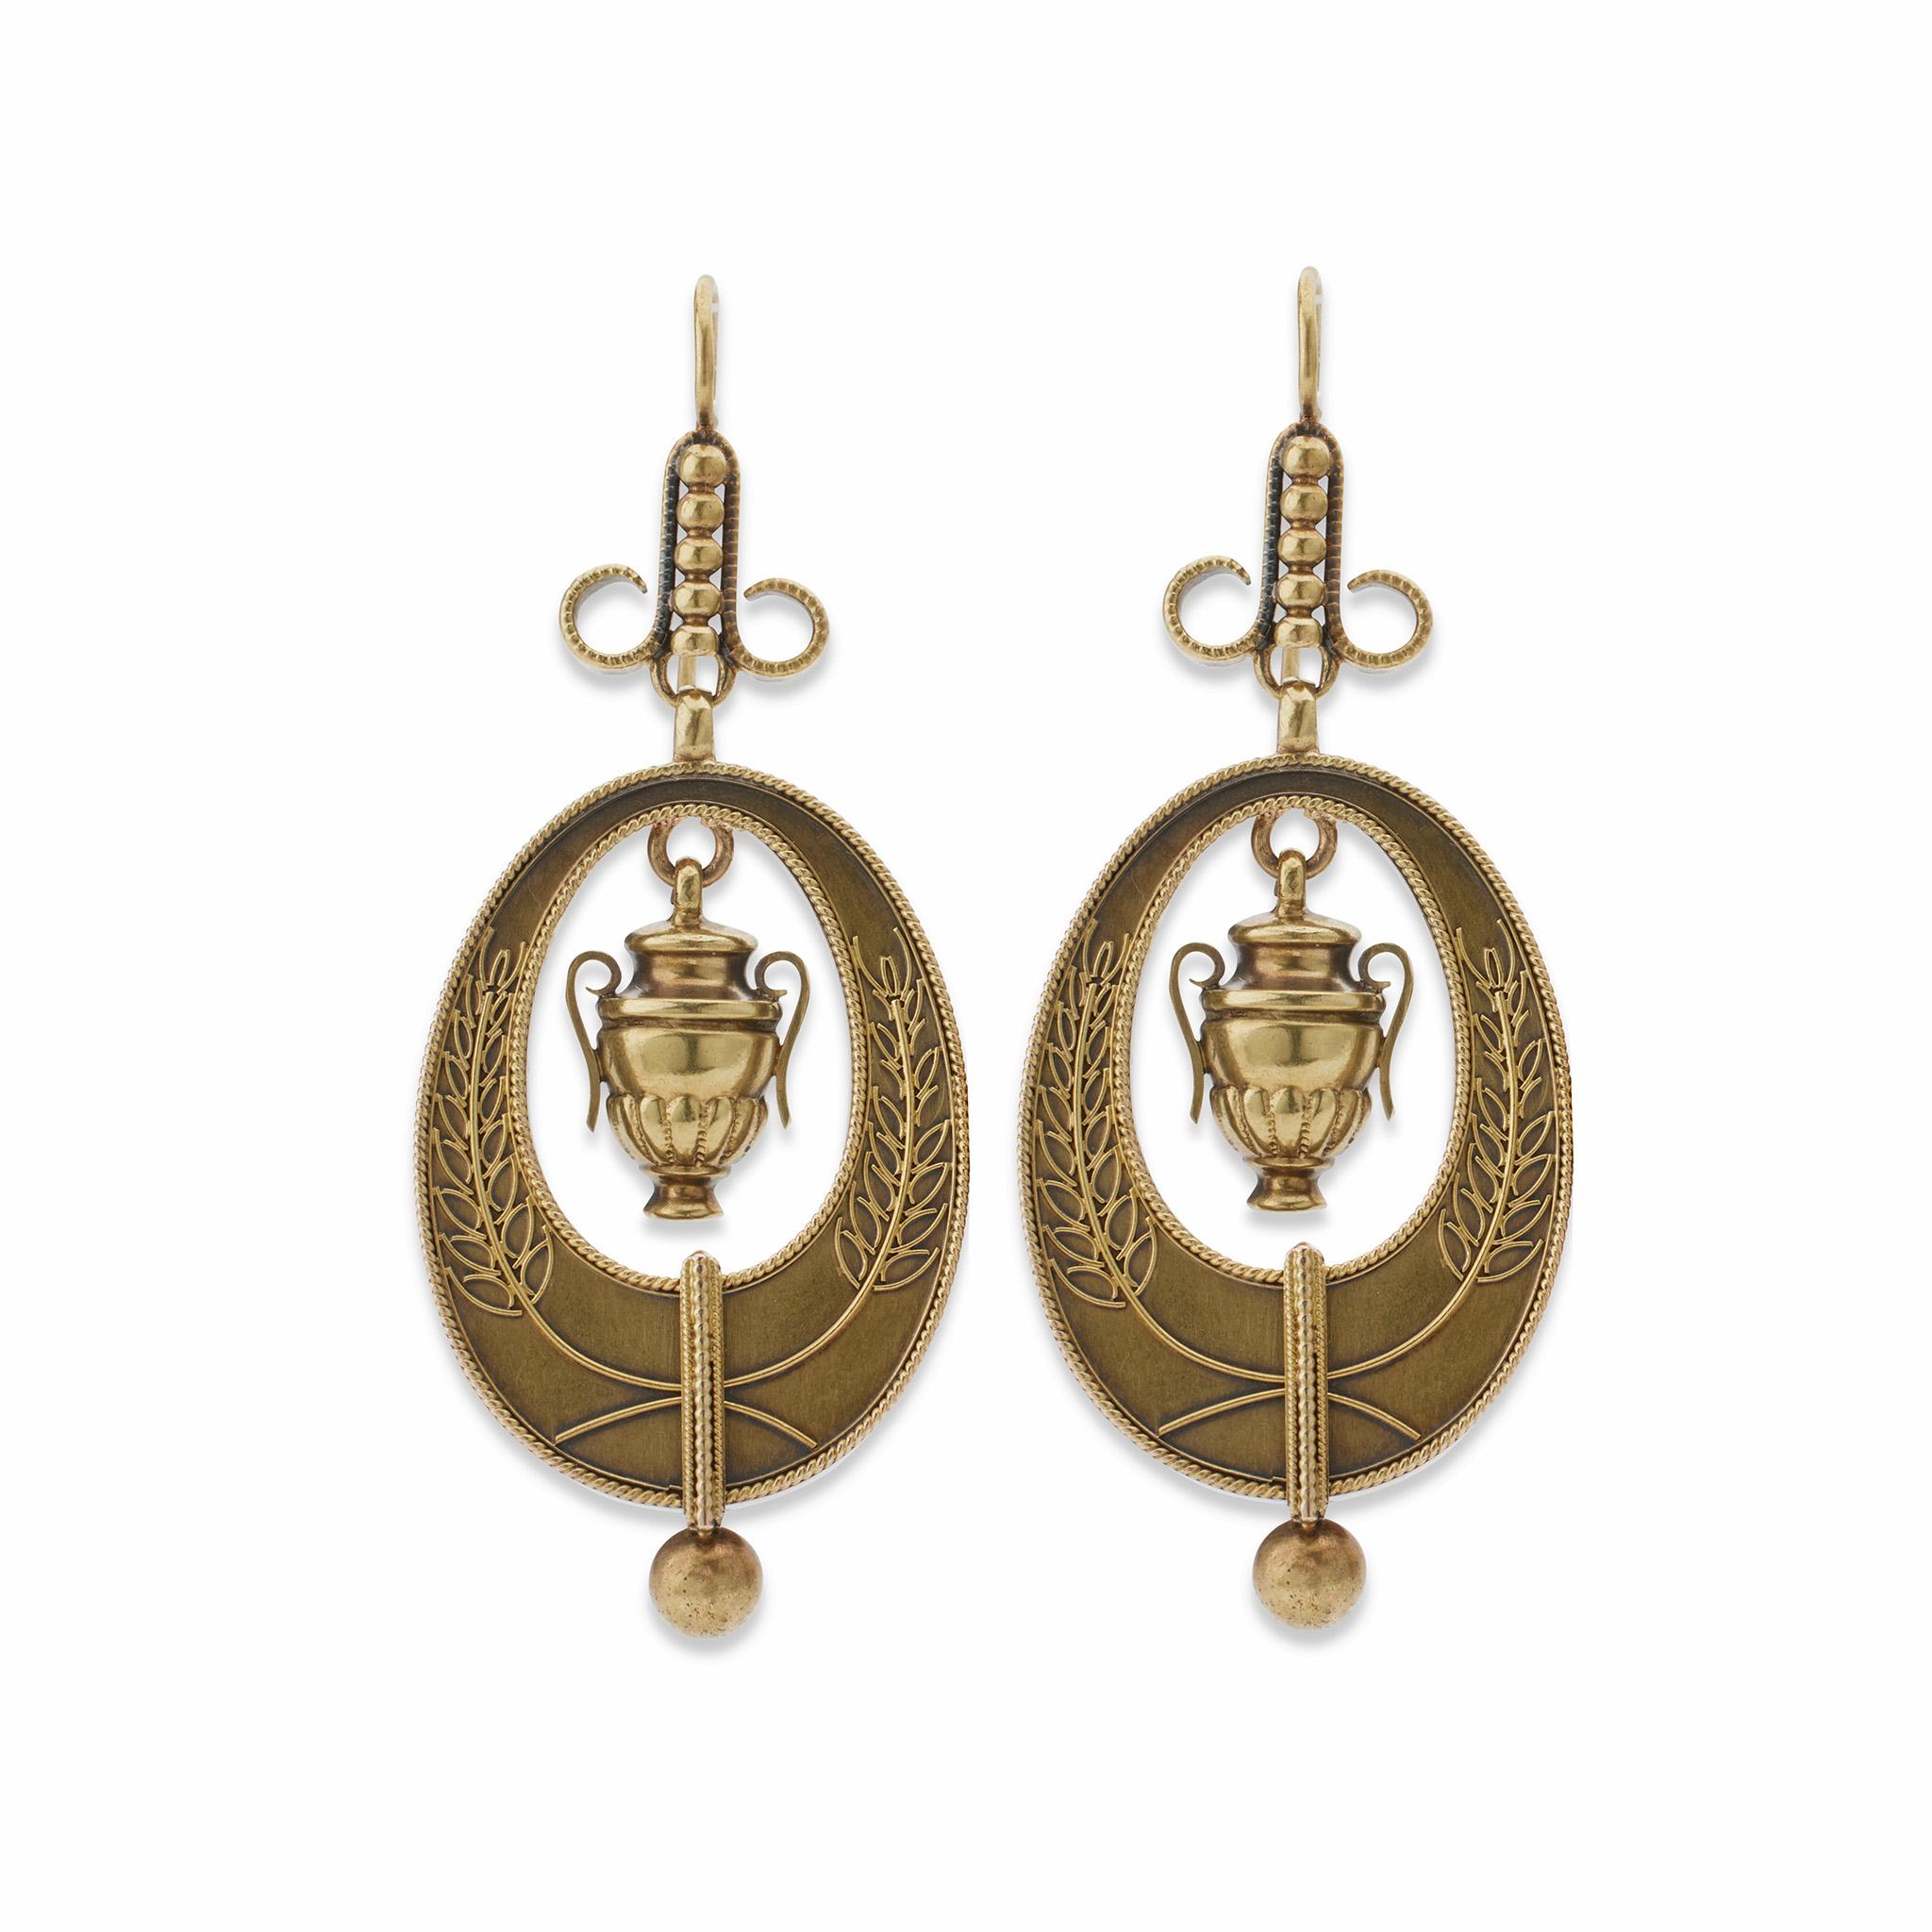 Antique 18K Gold Urn and Wreath Pendant Earrings In Excellent Condition For Sale In New York, NY